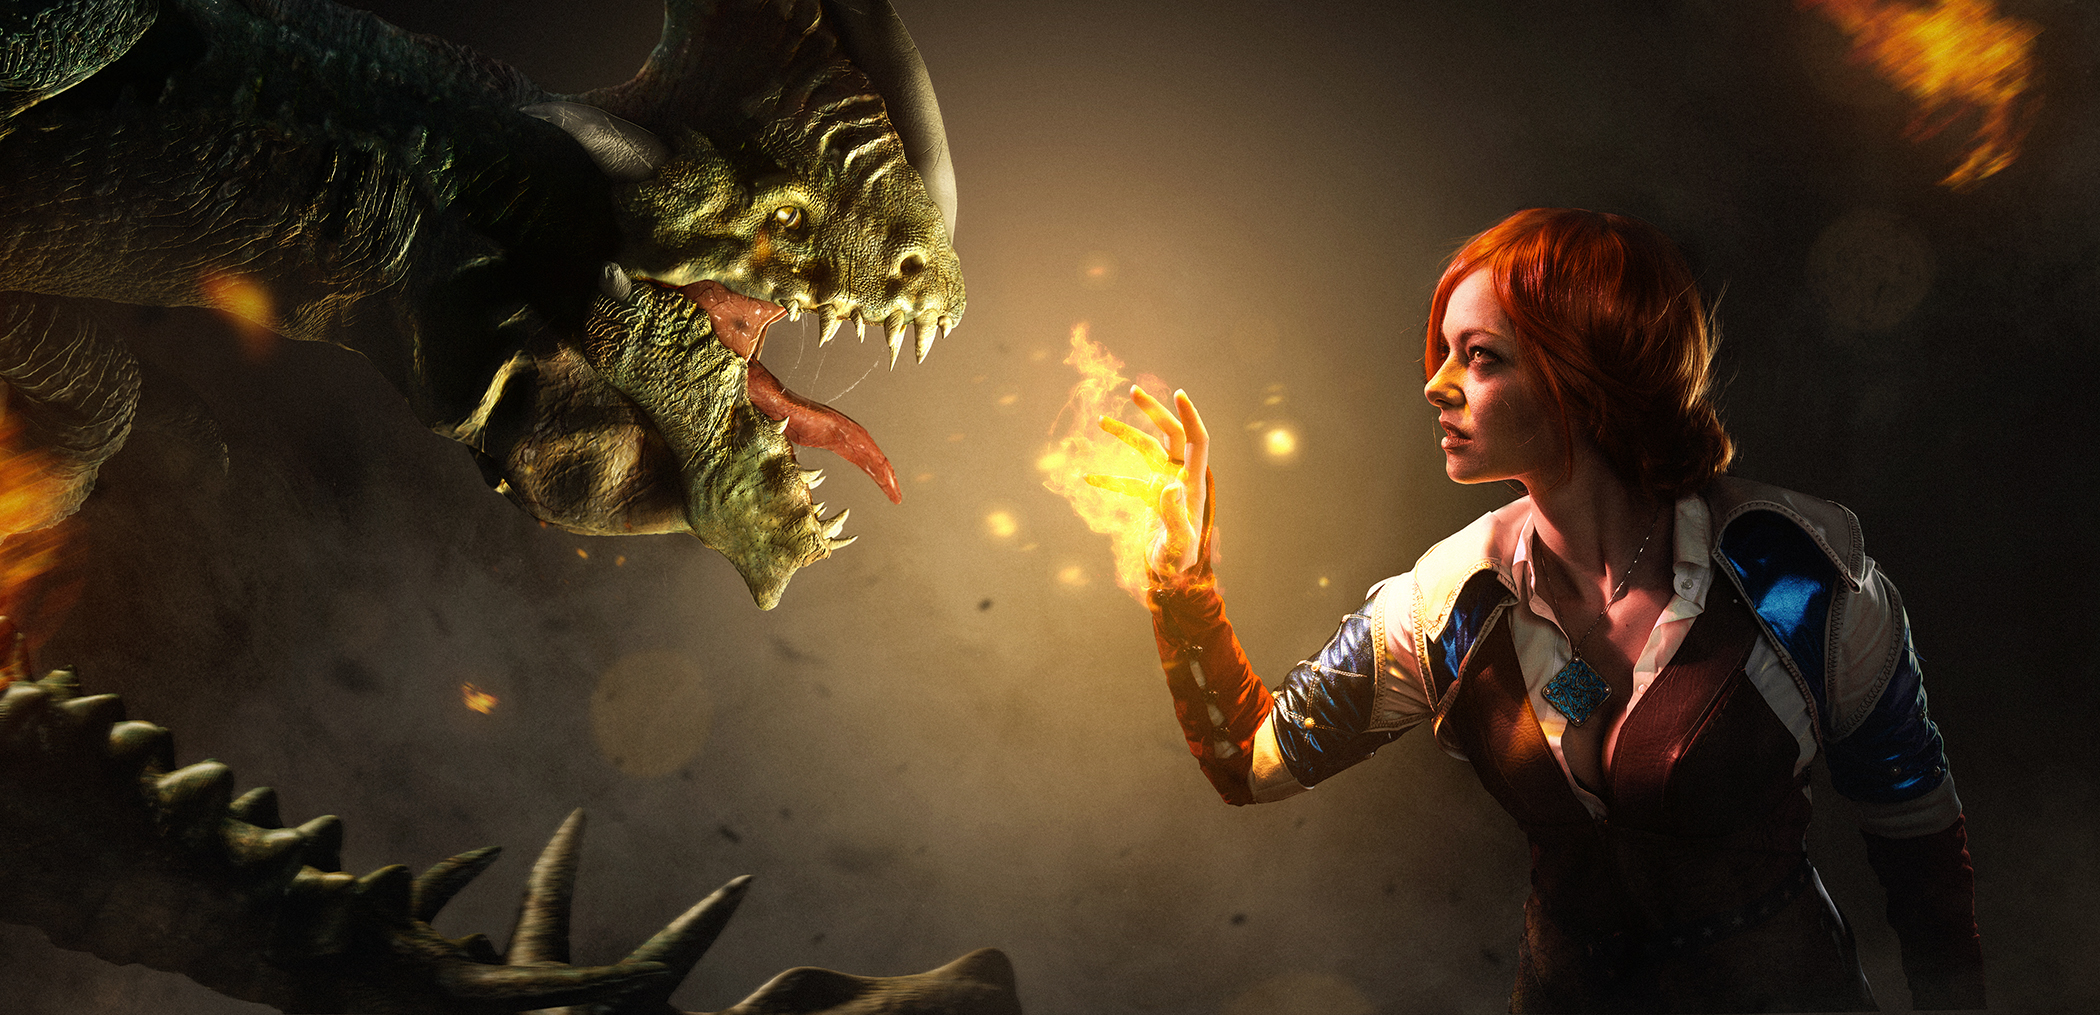 GZMID230 – Triss Merigold – The Witcher 3